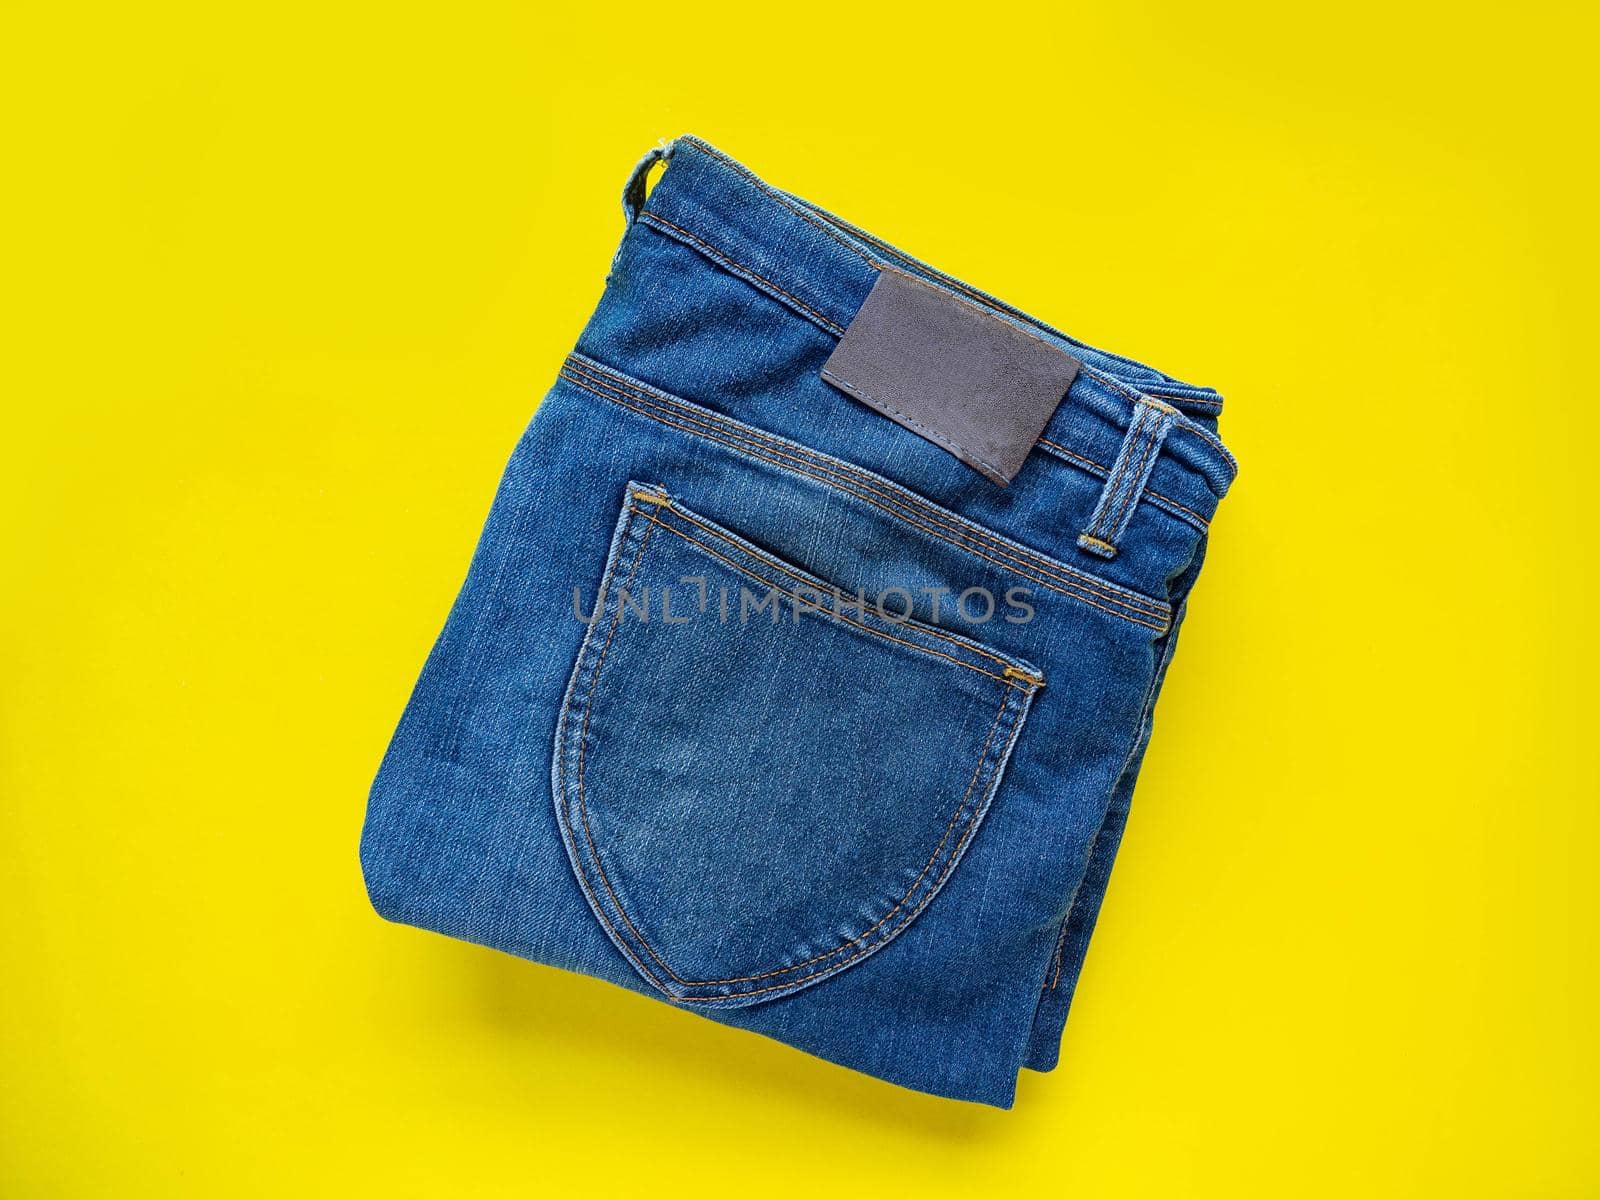 Blue pants Neatly folded See the details of the fabric Put on a yellow background by Kulpreya